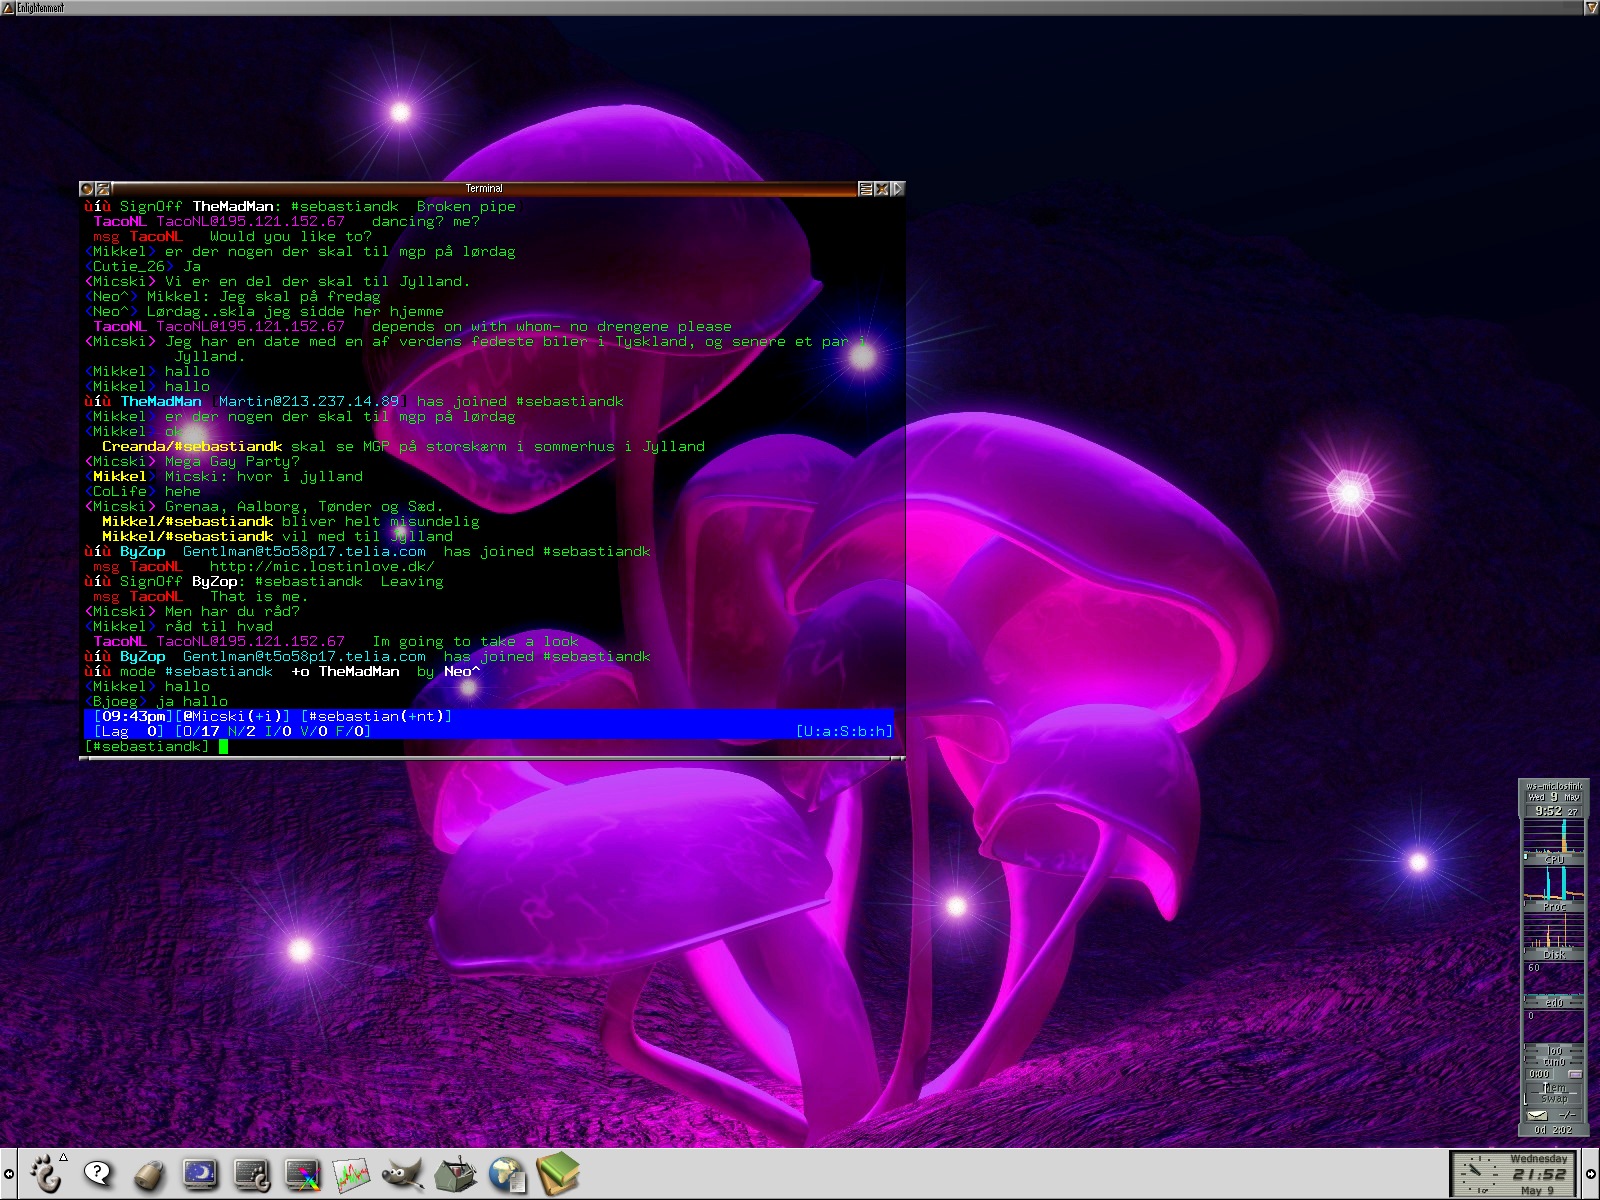 2001-05-09. GNOME desktop with mushrooms background on FreeBSD 4.3. Terminal with Irssi IRC client on #sebastiandk channel with TheMadMan, TacoNL, Mikkel, Cutie_26, Micski, Neo, Creanda, CoLife, ByZop and Bjoeg. GKrellM system monitor.